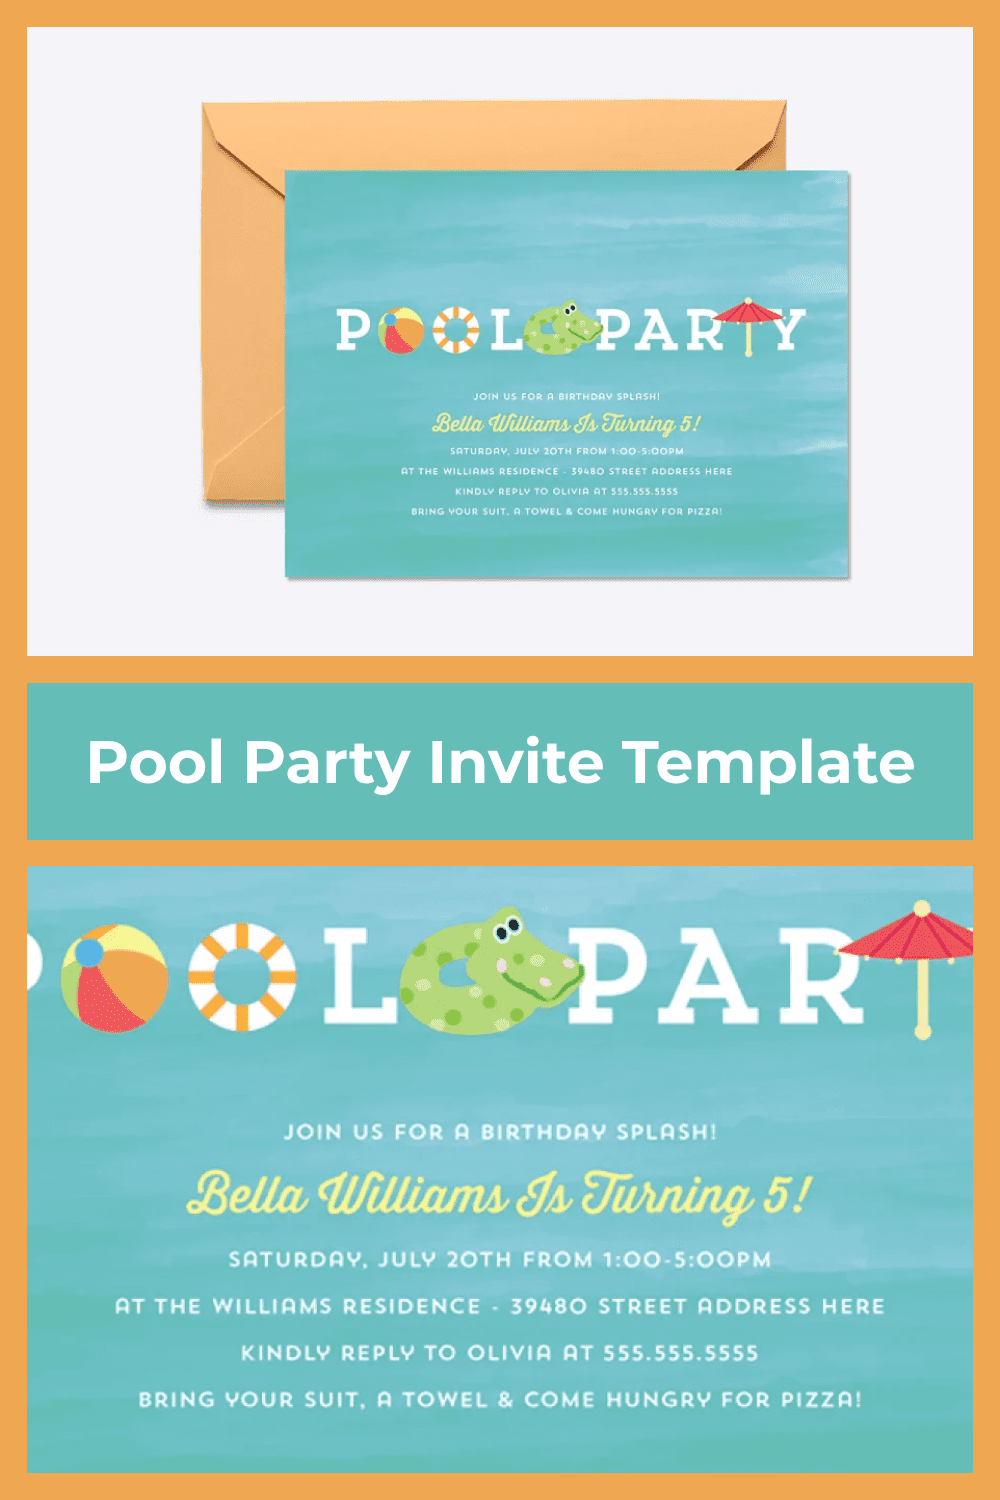 Pool party invitation in turquoise color.